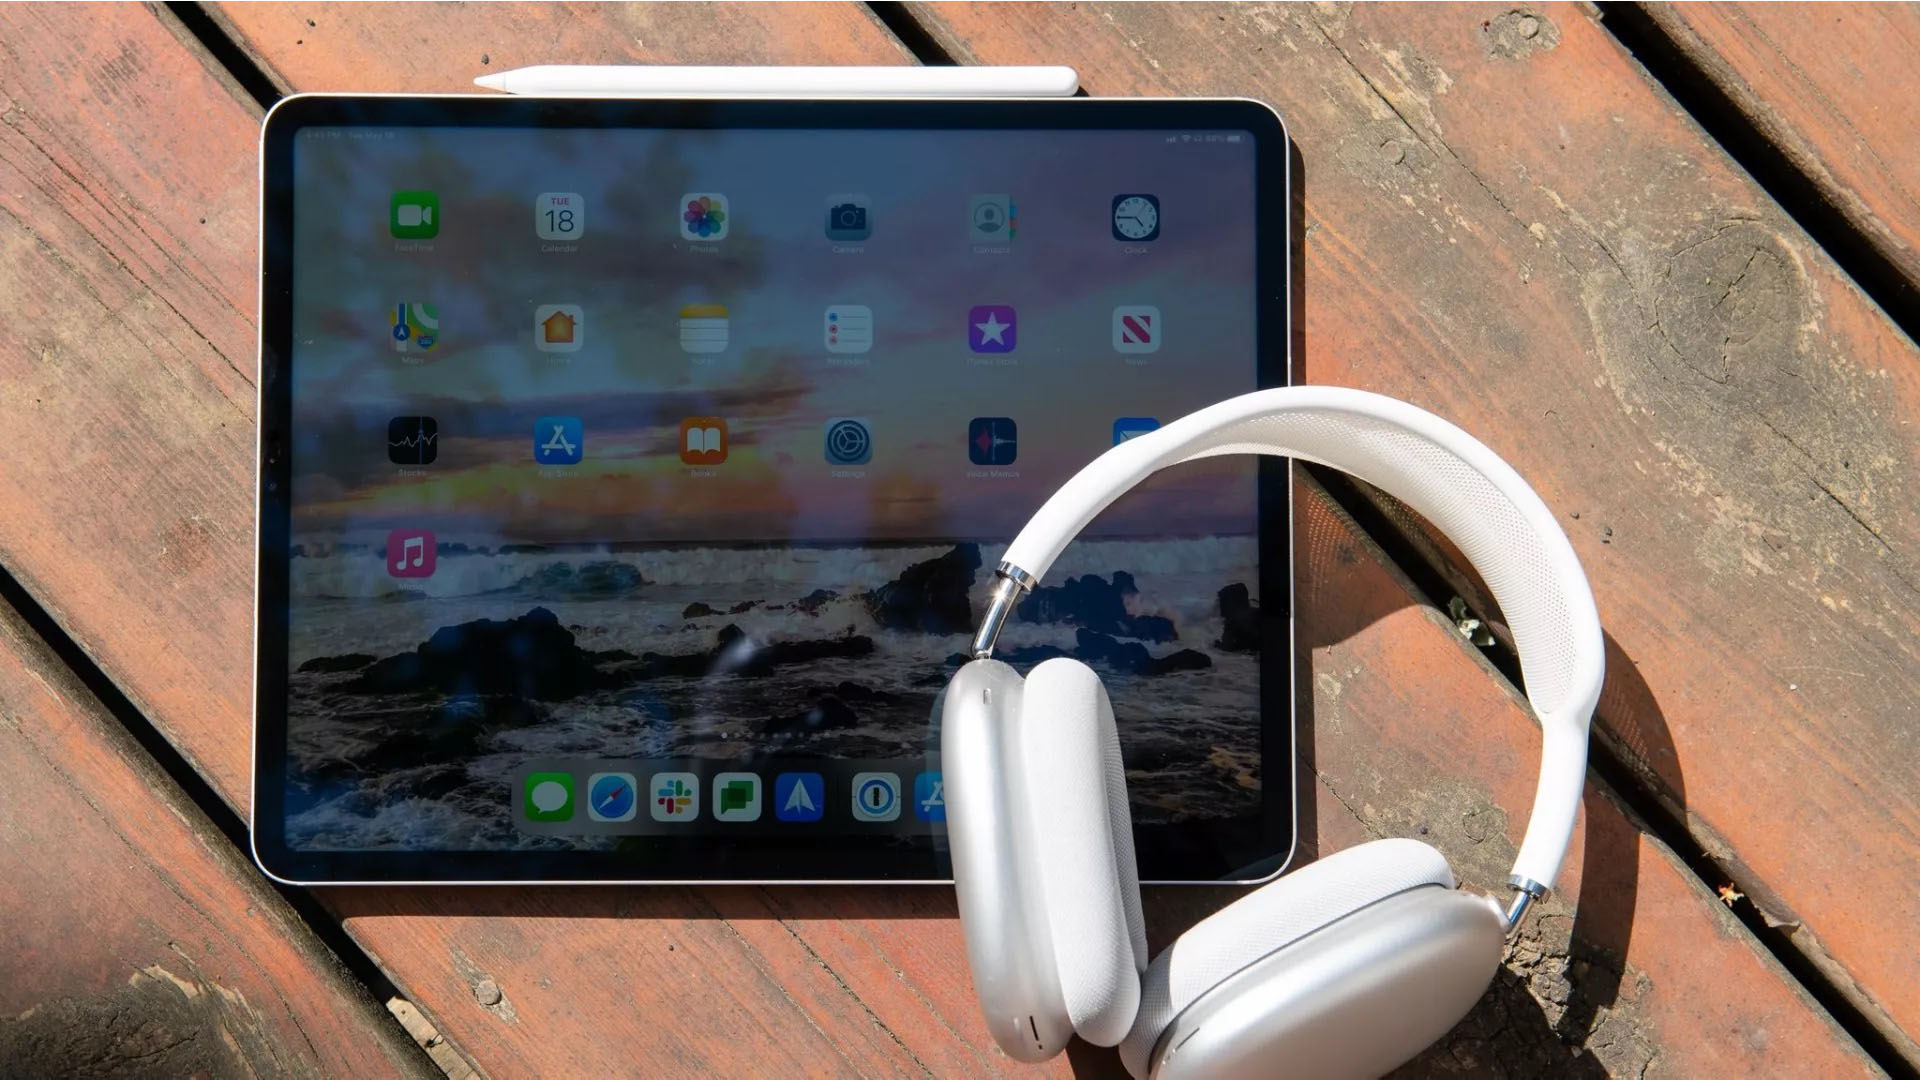 An iPad Pro on a table next to headphones